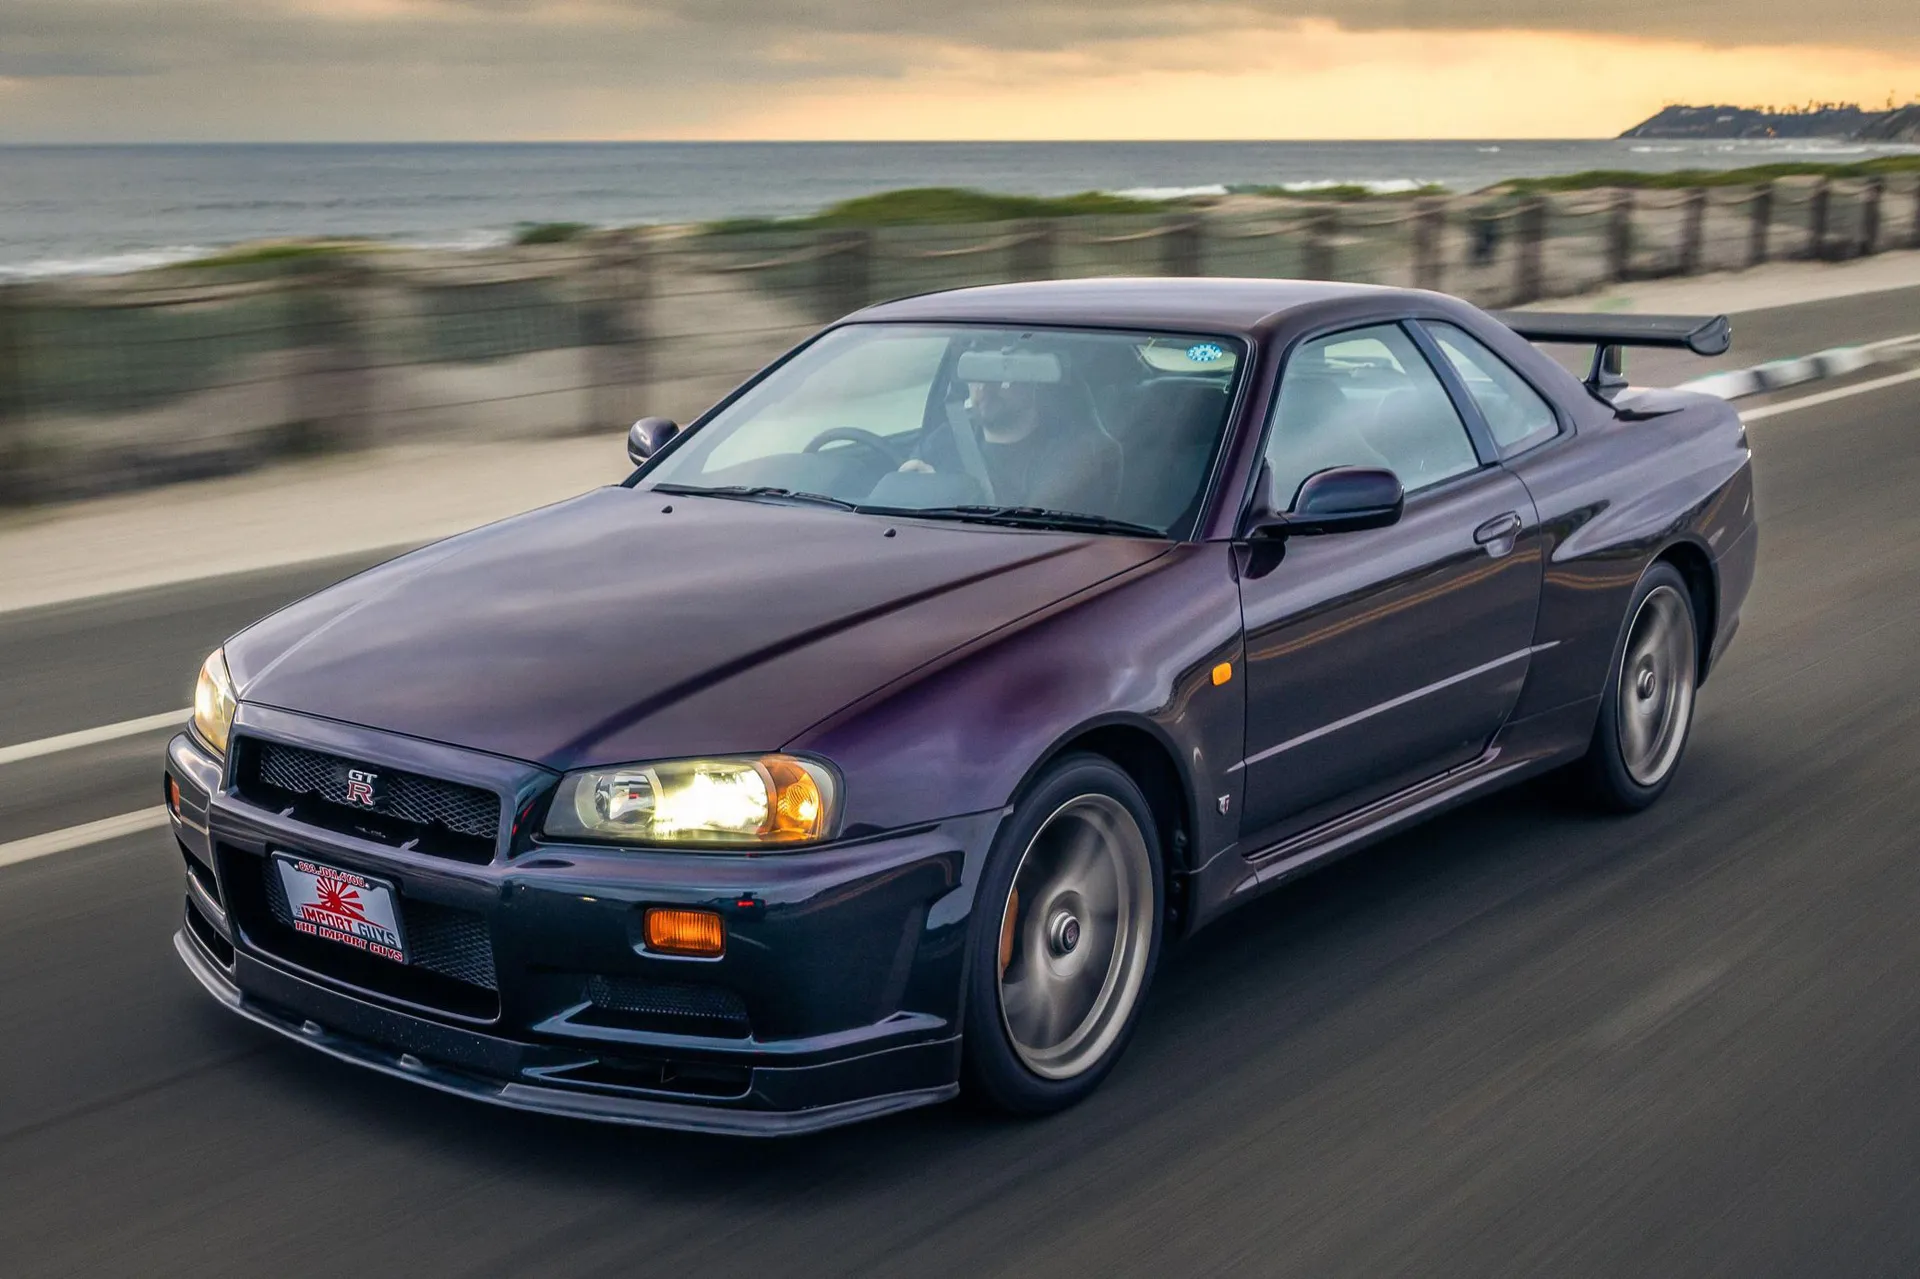 Paul Walker's 'Fast & Furious 4' R34 Nissan GT-R For Sale, Priced At $1.35  Million